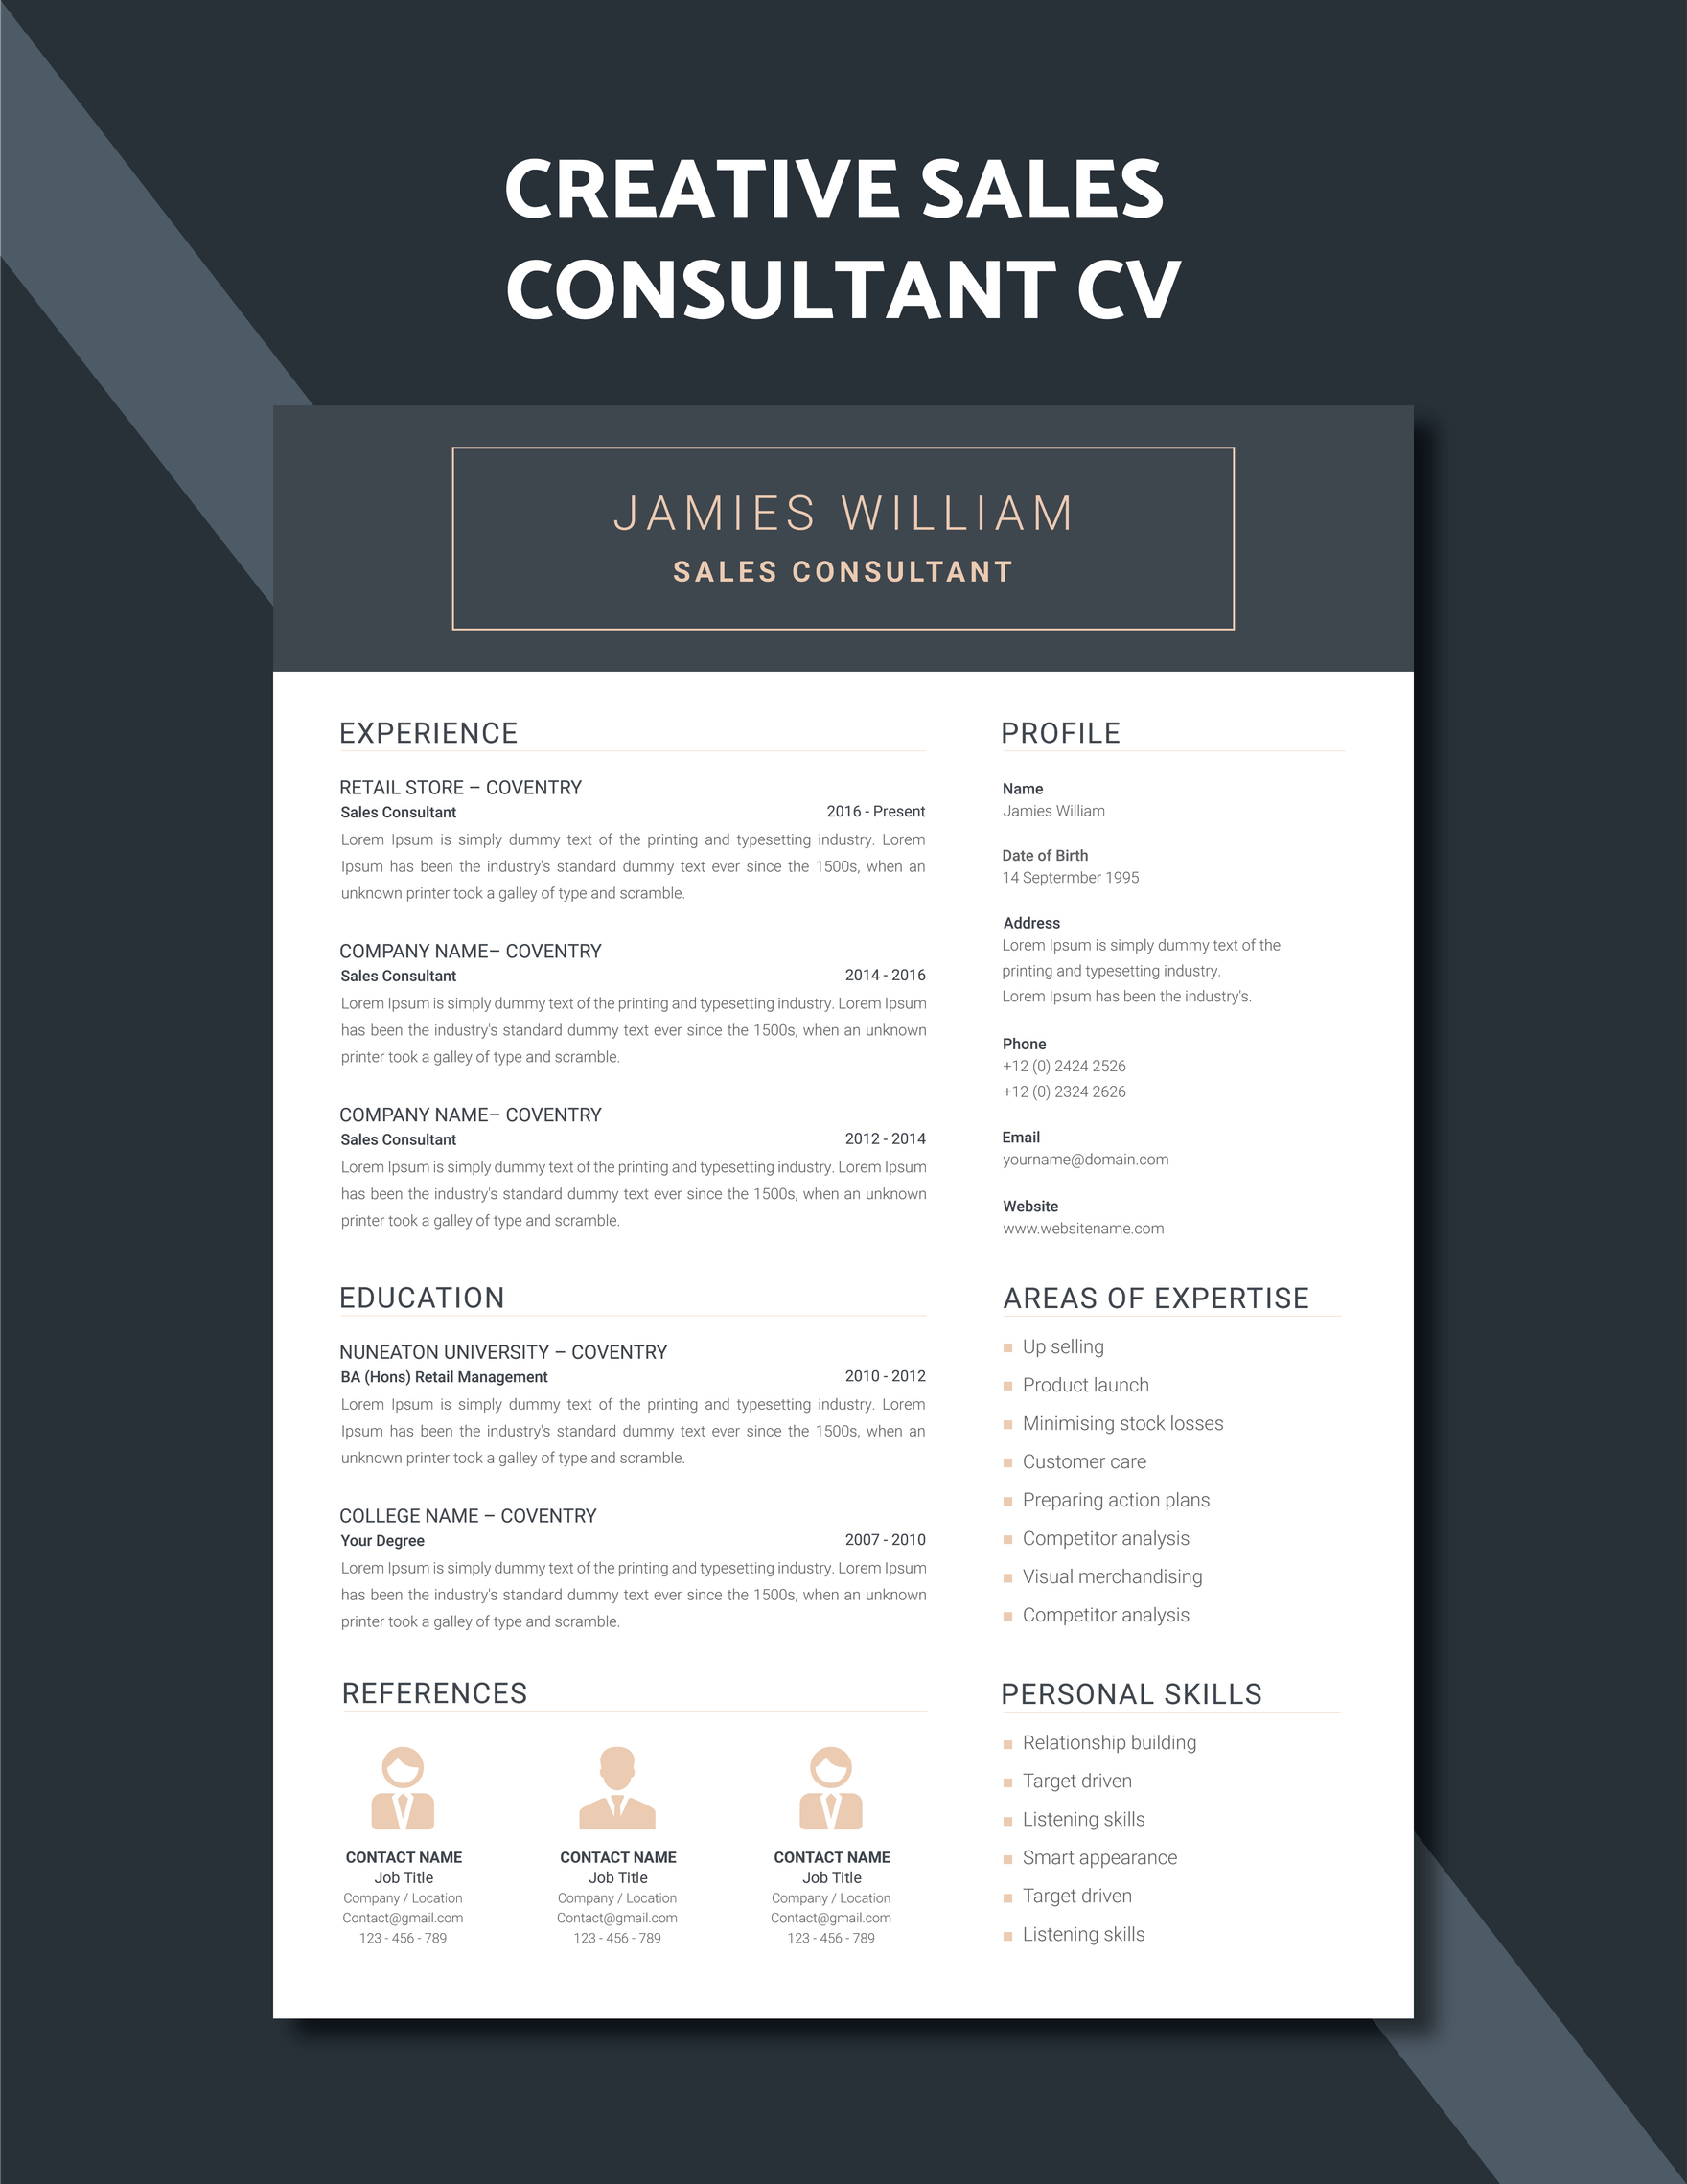 Creative Sales Consultant CV Template in Word, PSD, Apple Pages, Publisher